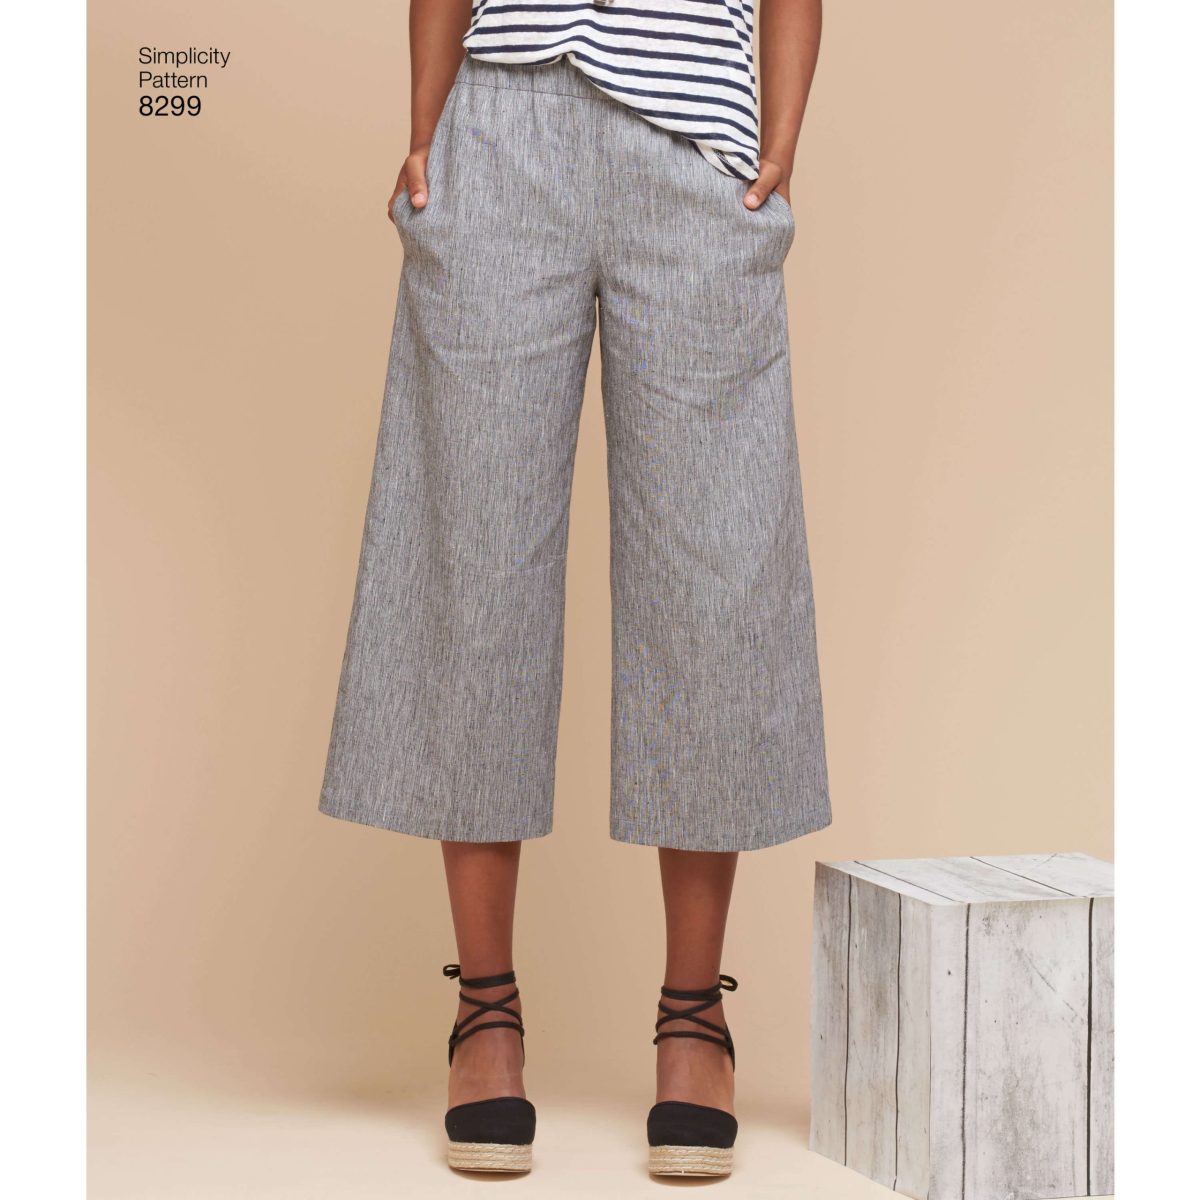 Simplicity Pattern 8299 Misses' Skirts or trousers in various lengths